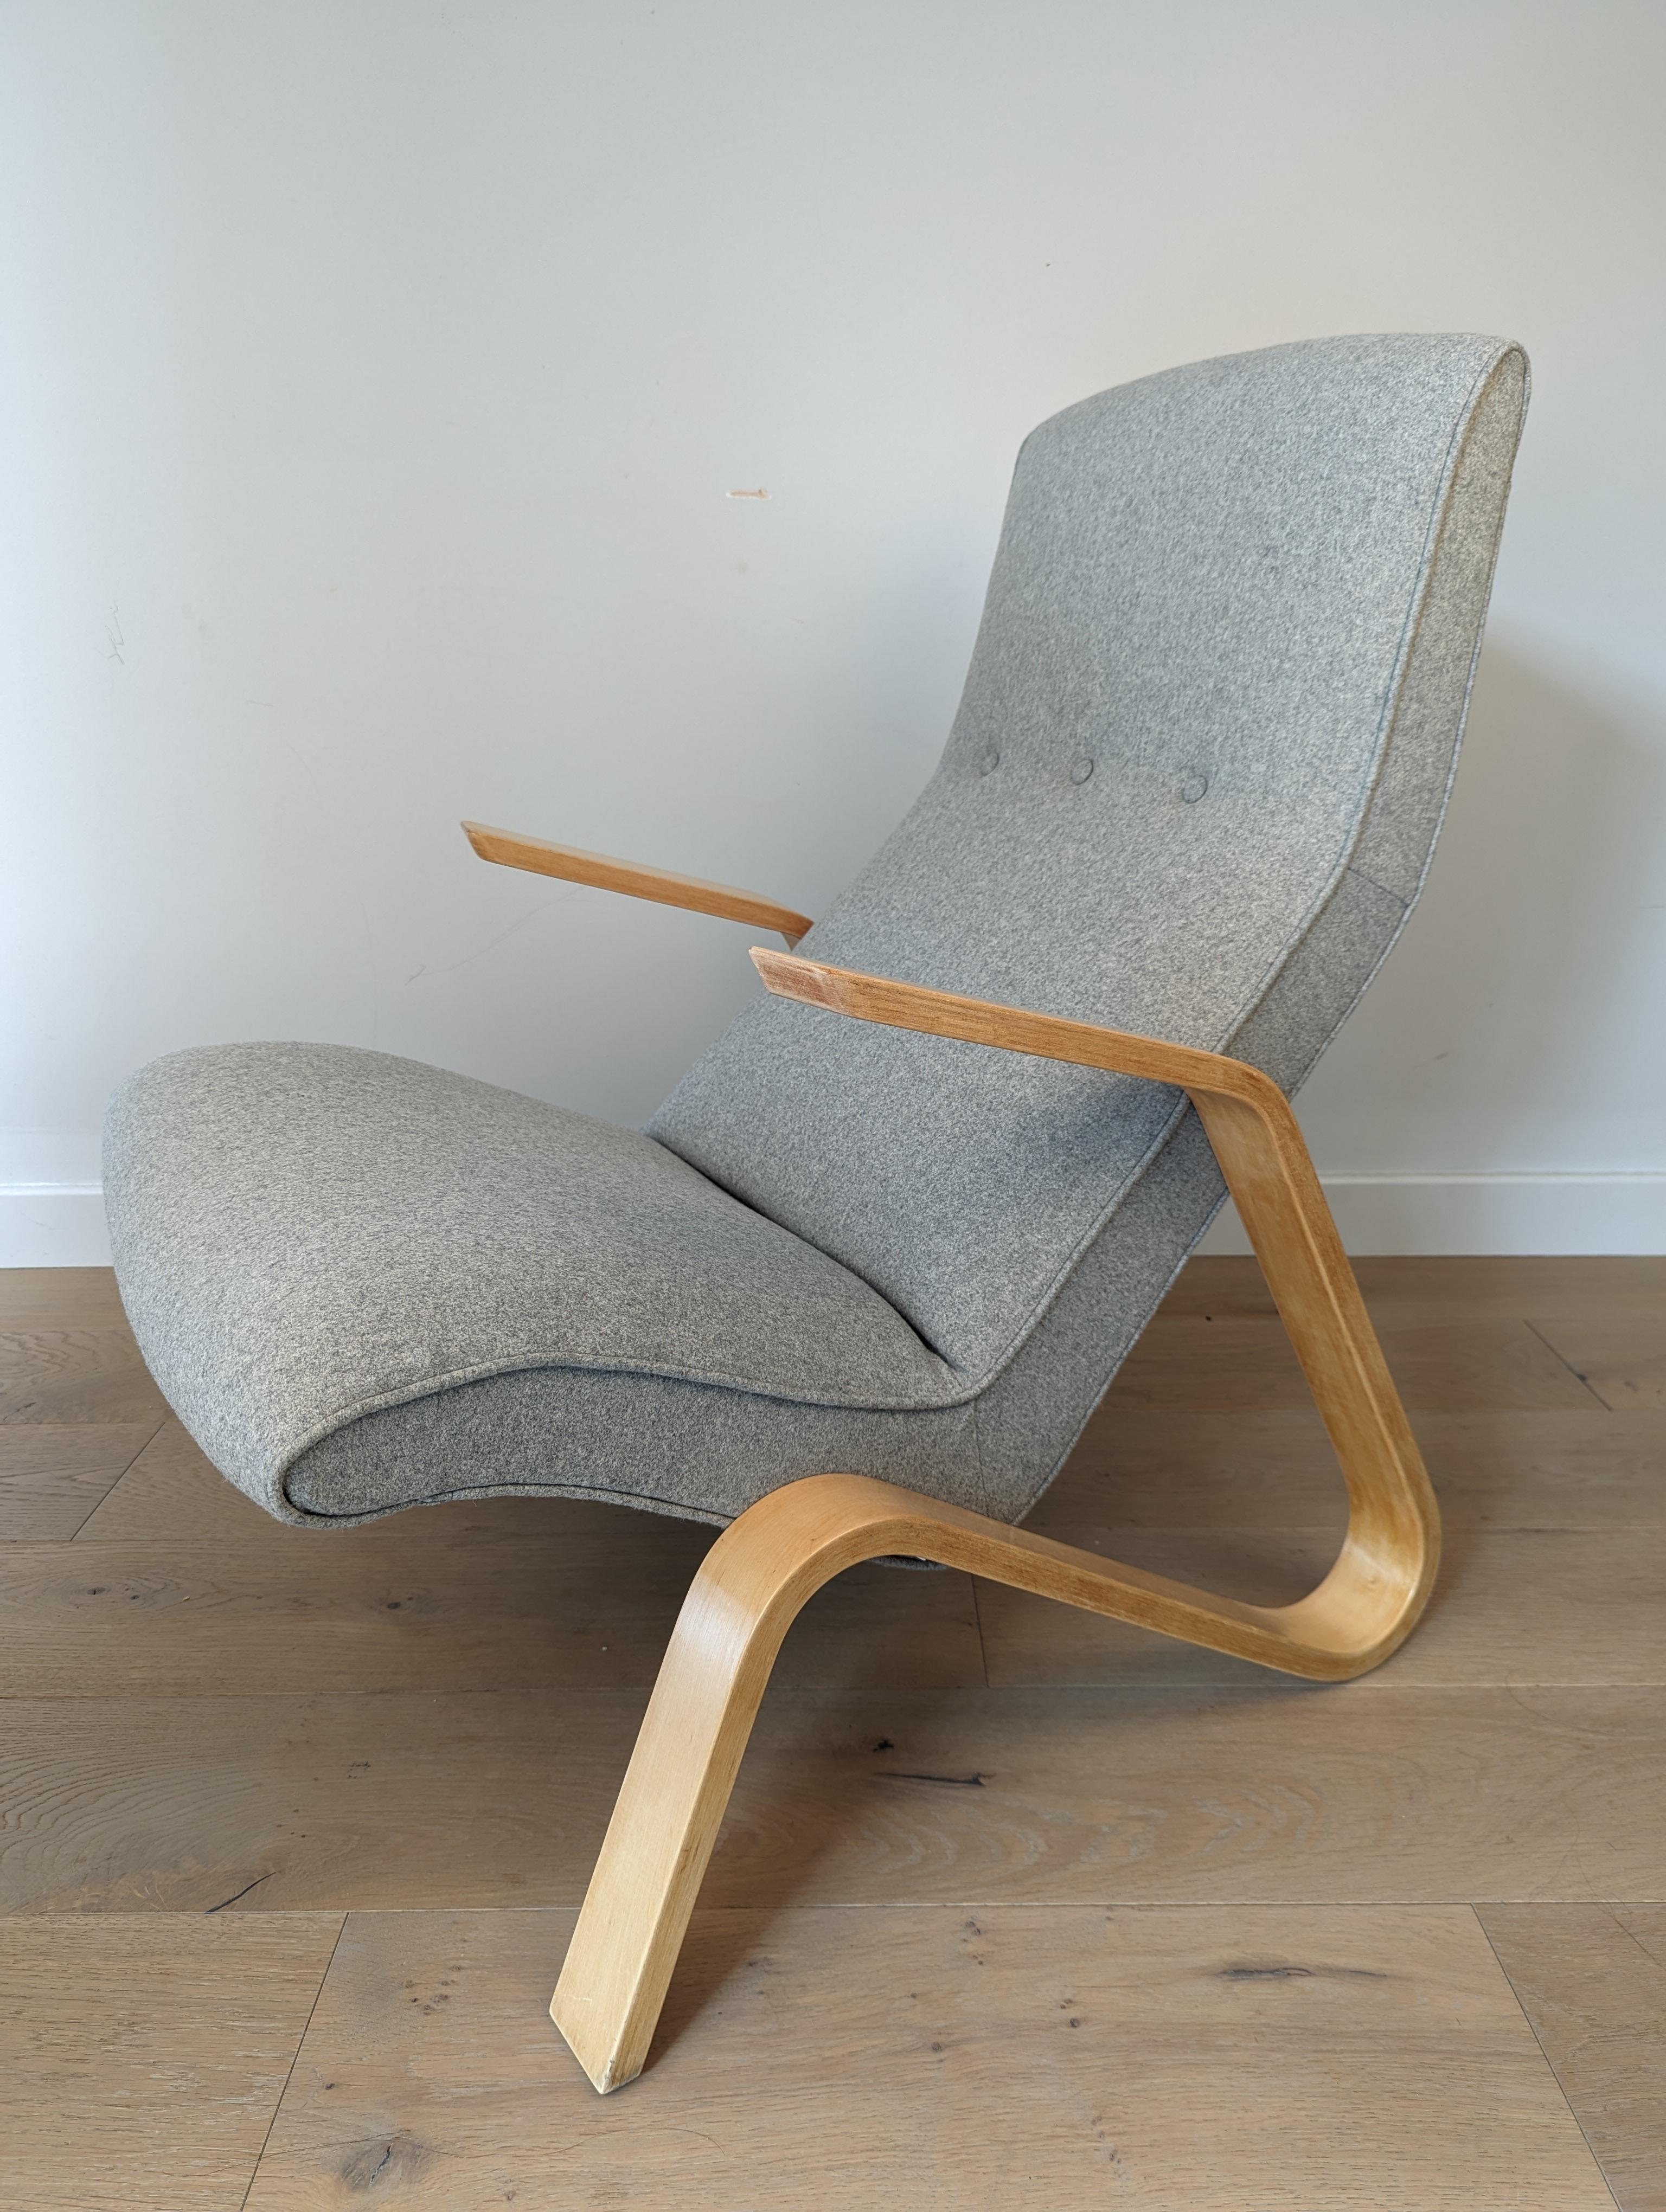 20th Century Mid-century Grasshopper chair by Eero Saarinen for Knoll (1950s) For Sale